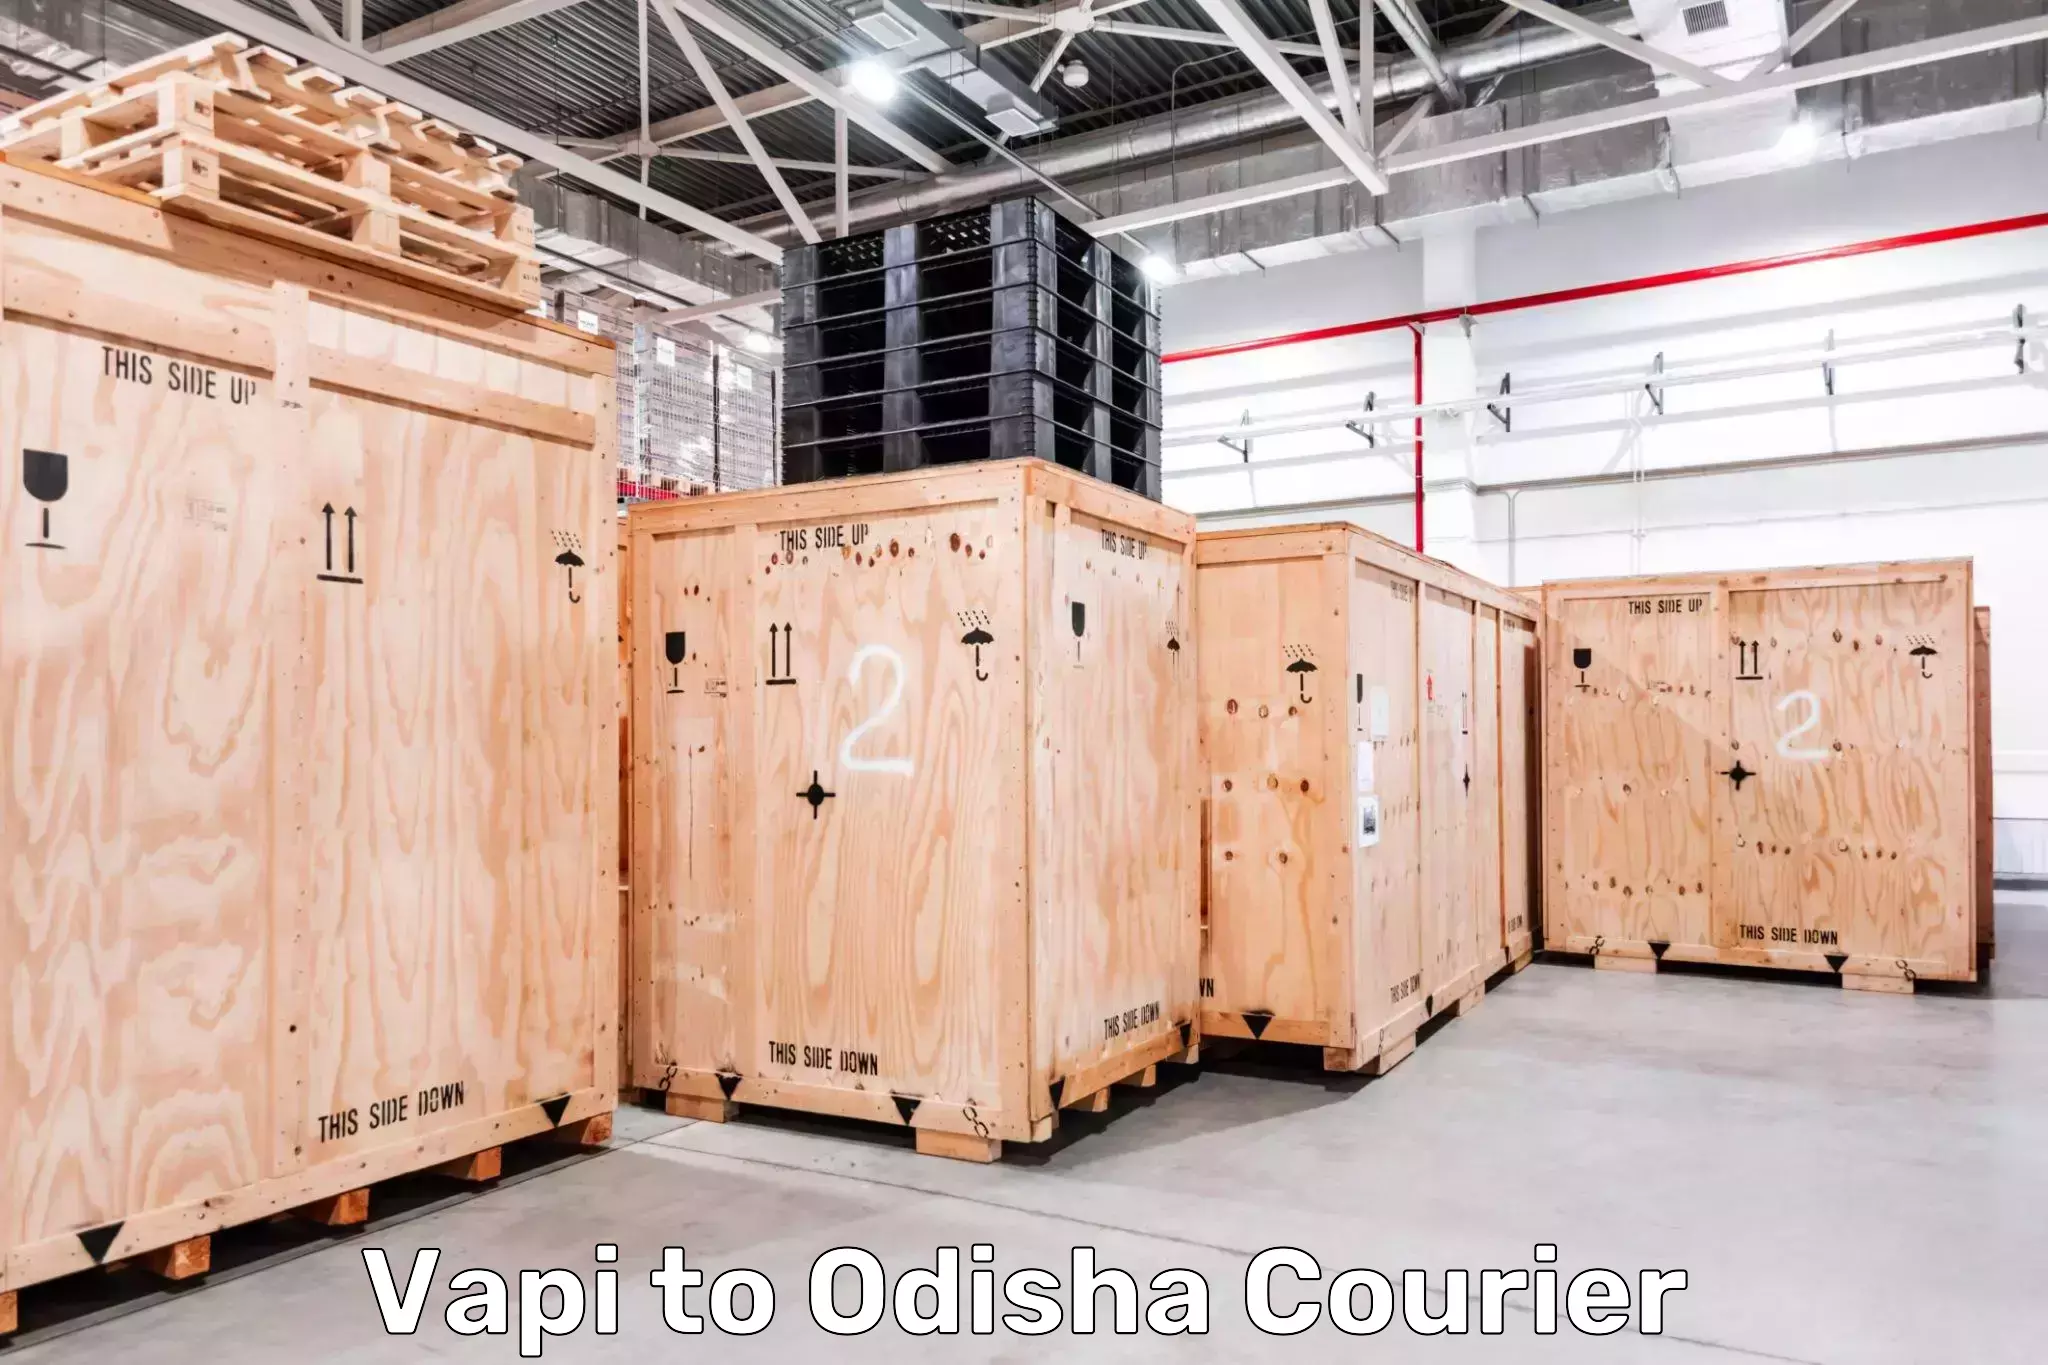 Package delivery network Vapi to Odisha